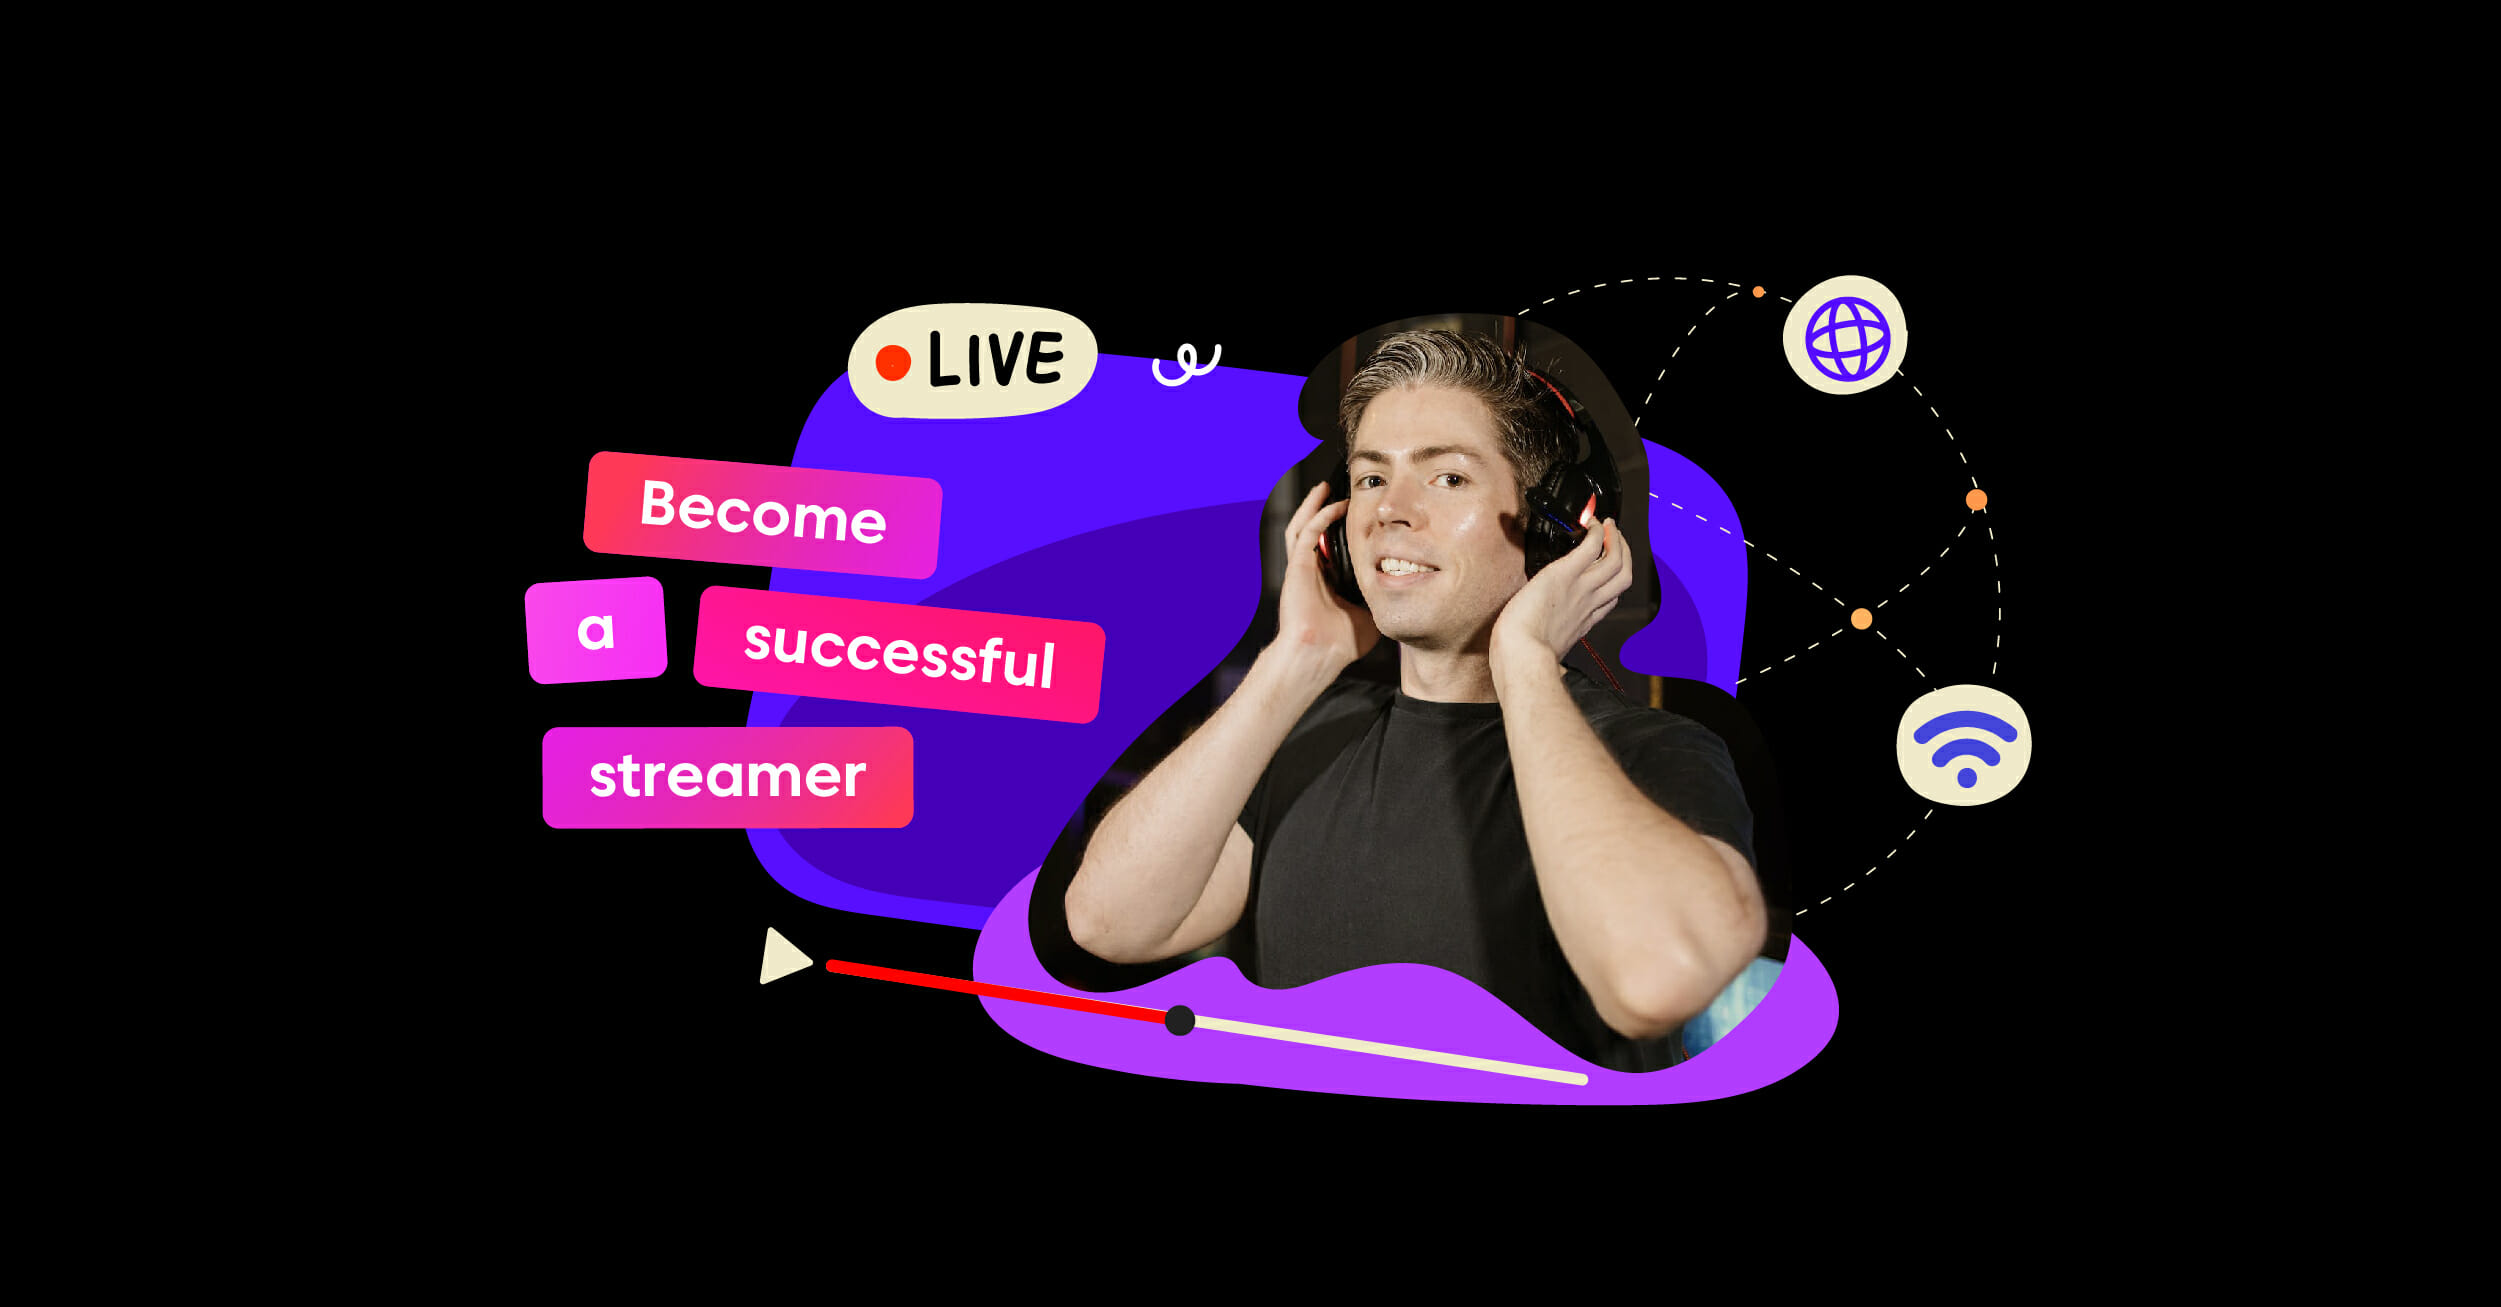 How to Become a Successful Streamer